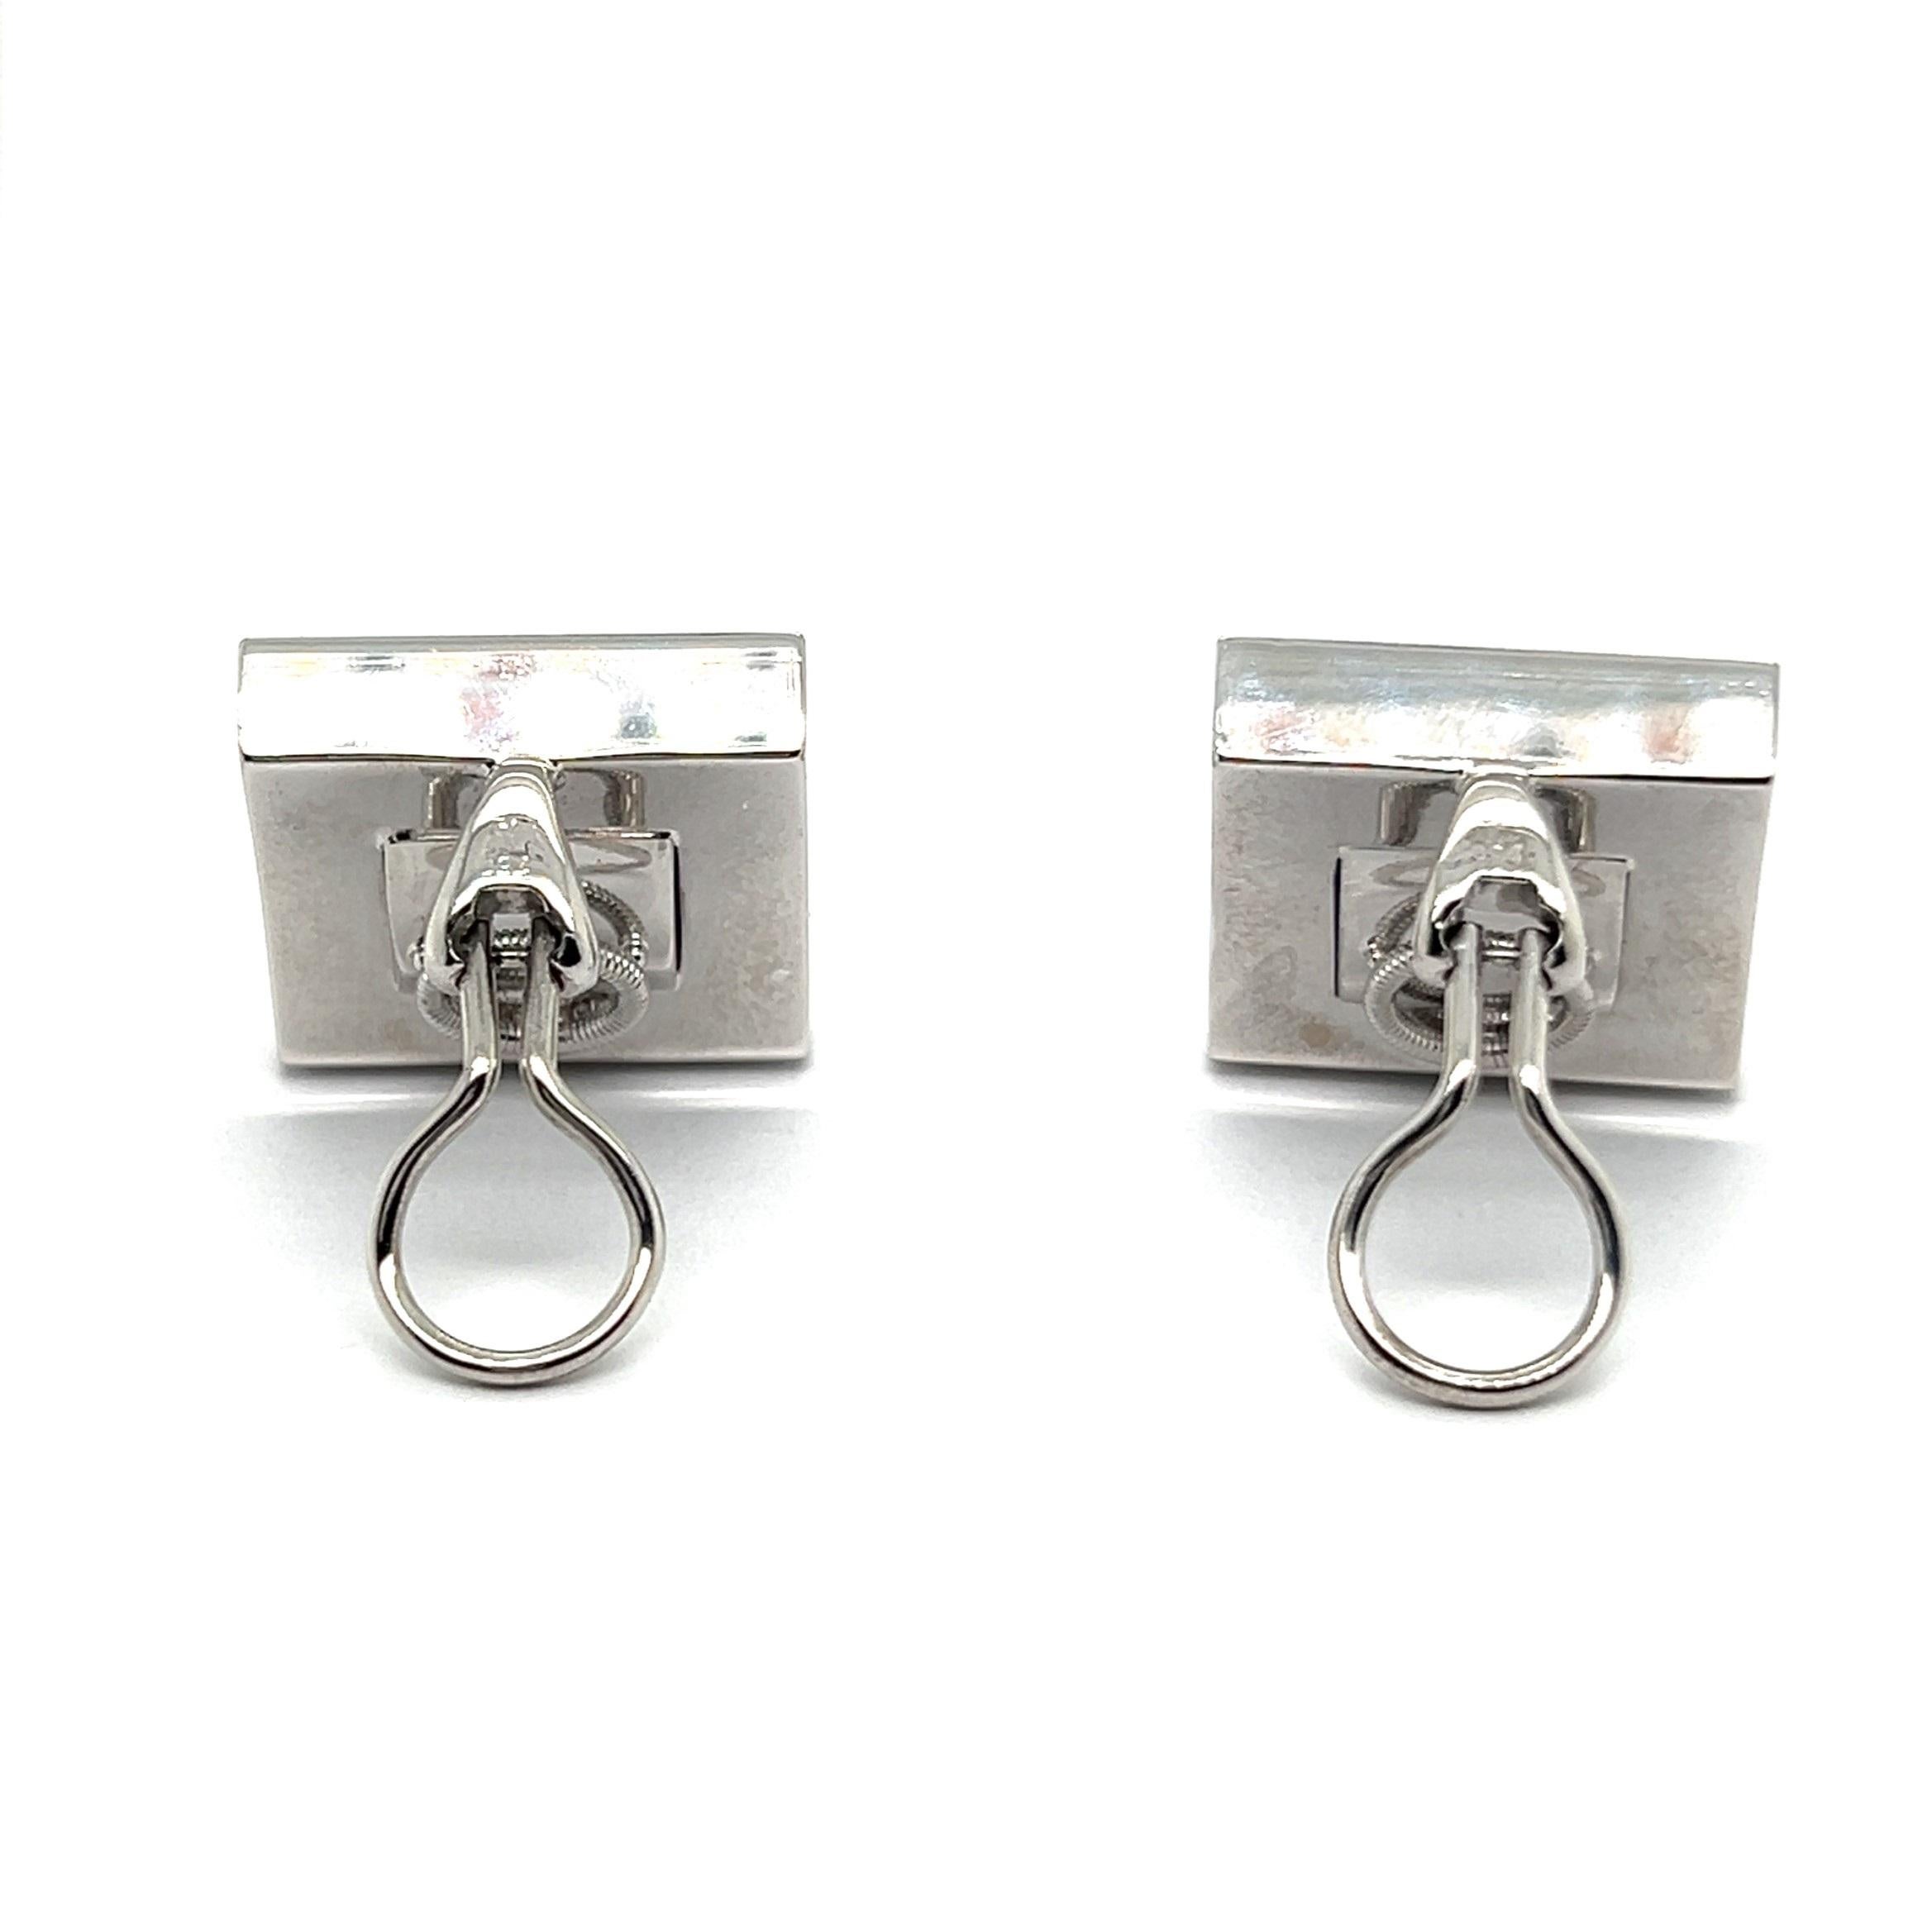  Bold Graphic Earrings with Diamonds in 18 Karat White Gold by Majo Fruithof For Sale 1